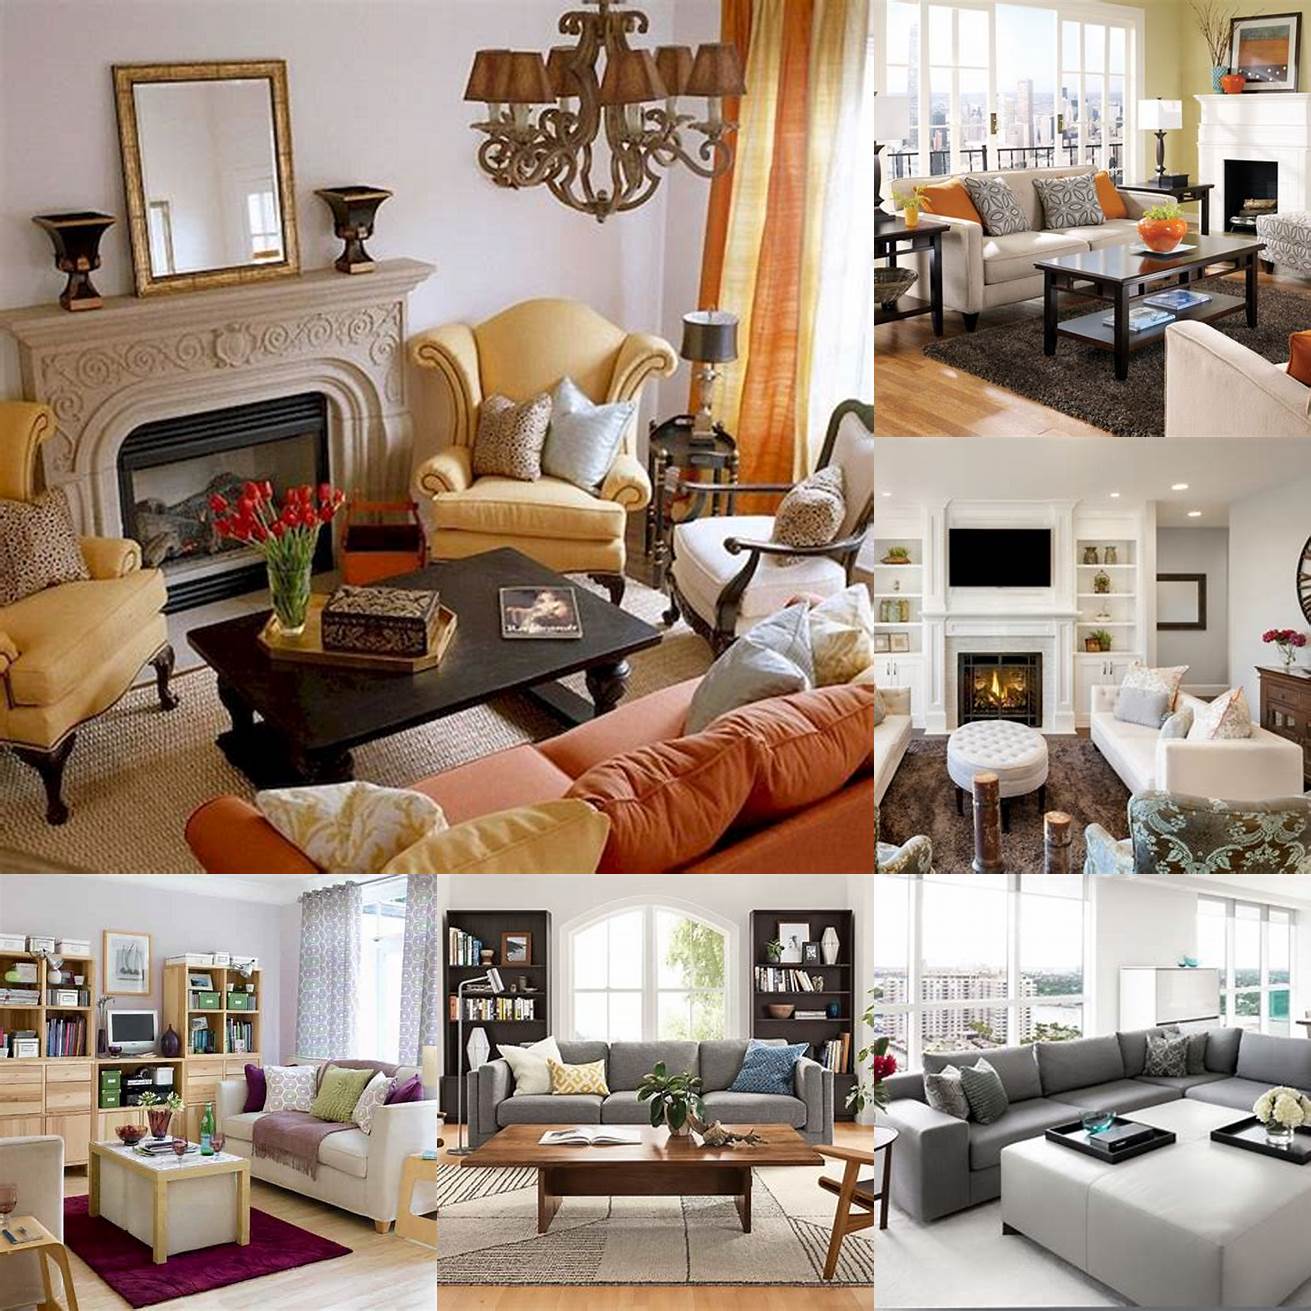 Choose a Style that Fits Your Space